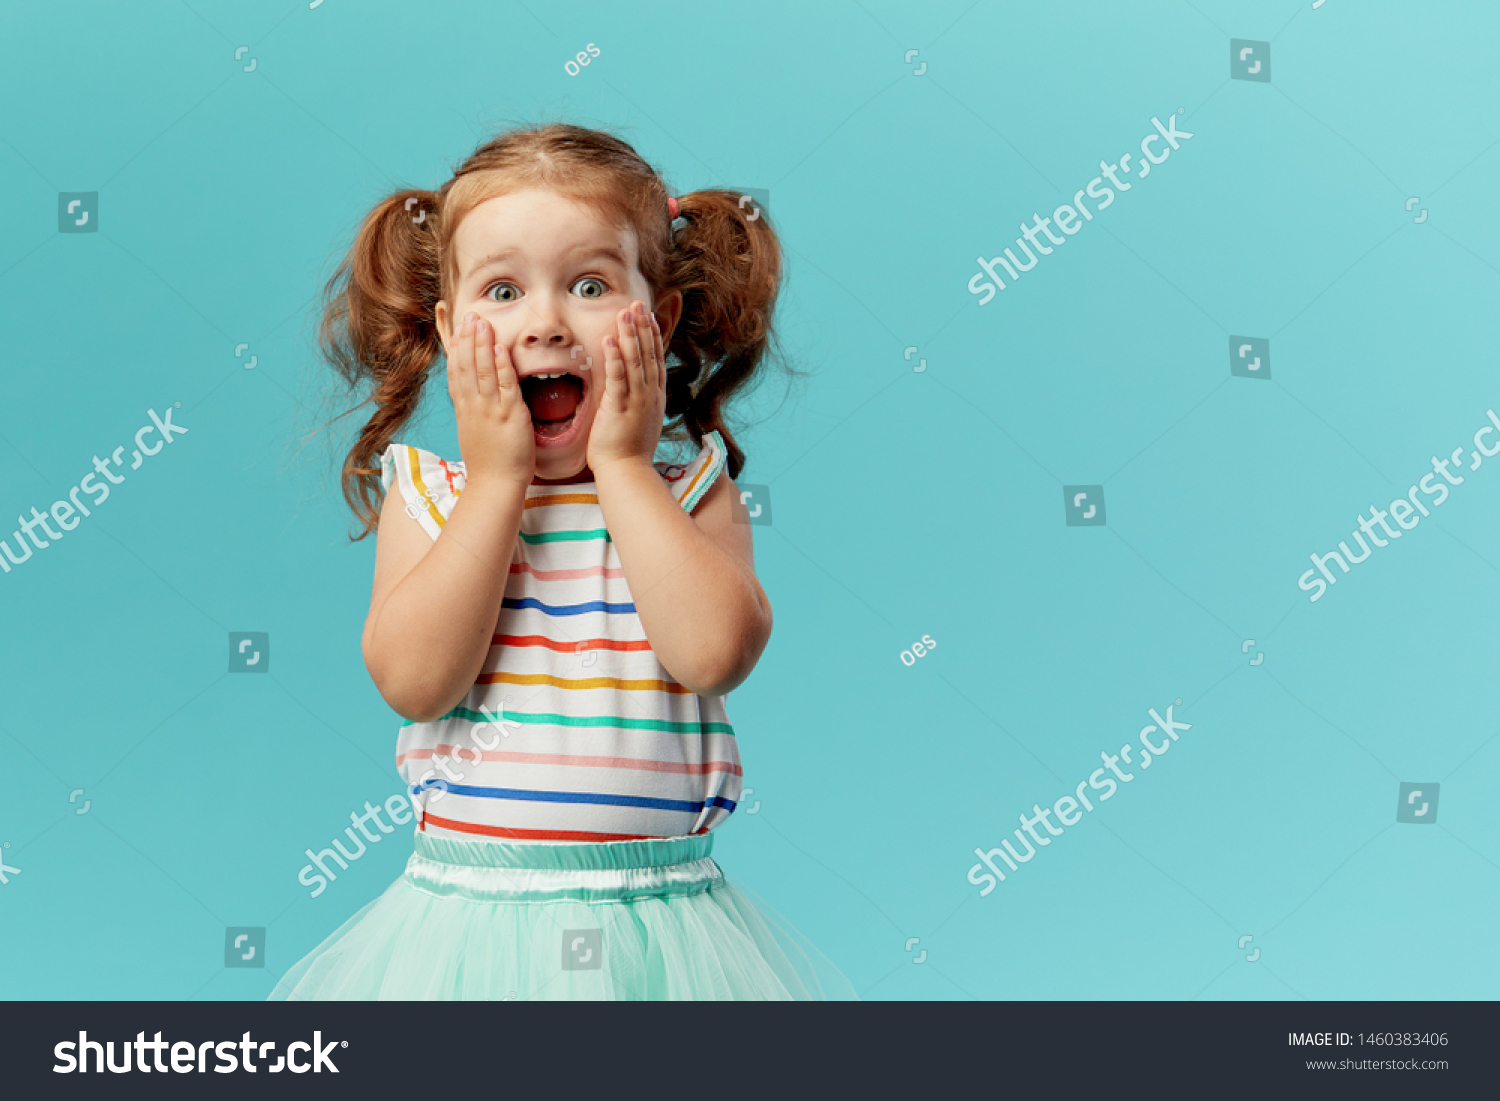 Portrait of surprised cute little toddler girl child standing isolated over blue background. Looking at camera. hands near open mouth #1460383406